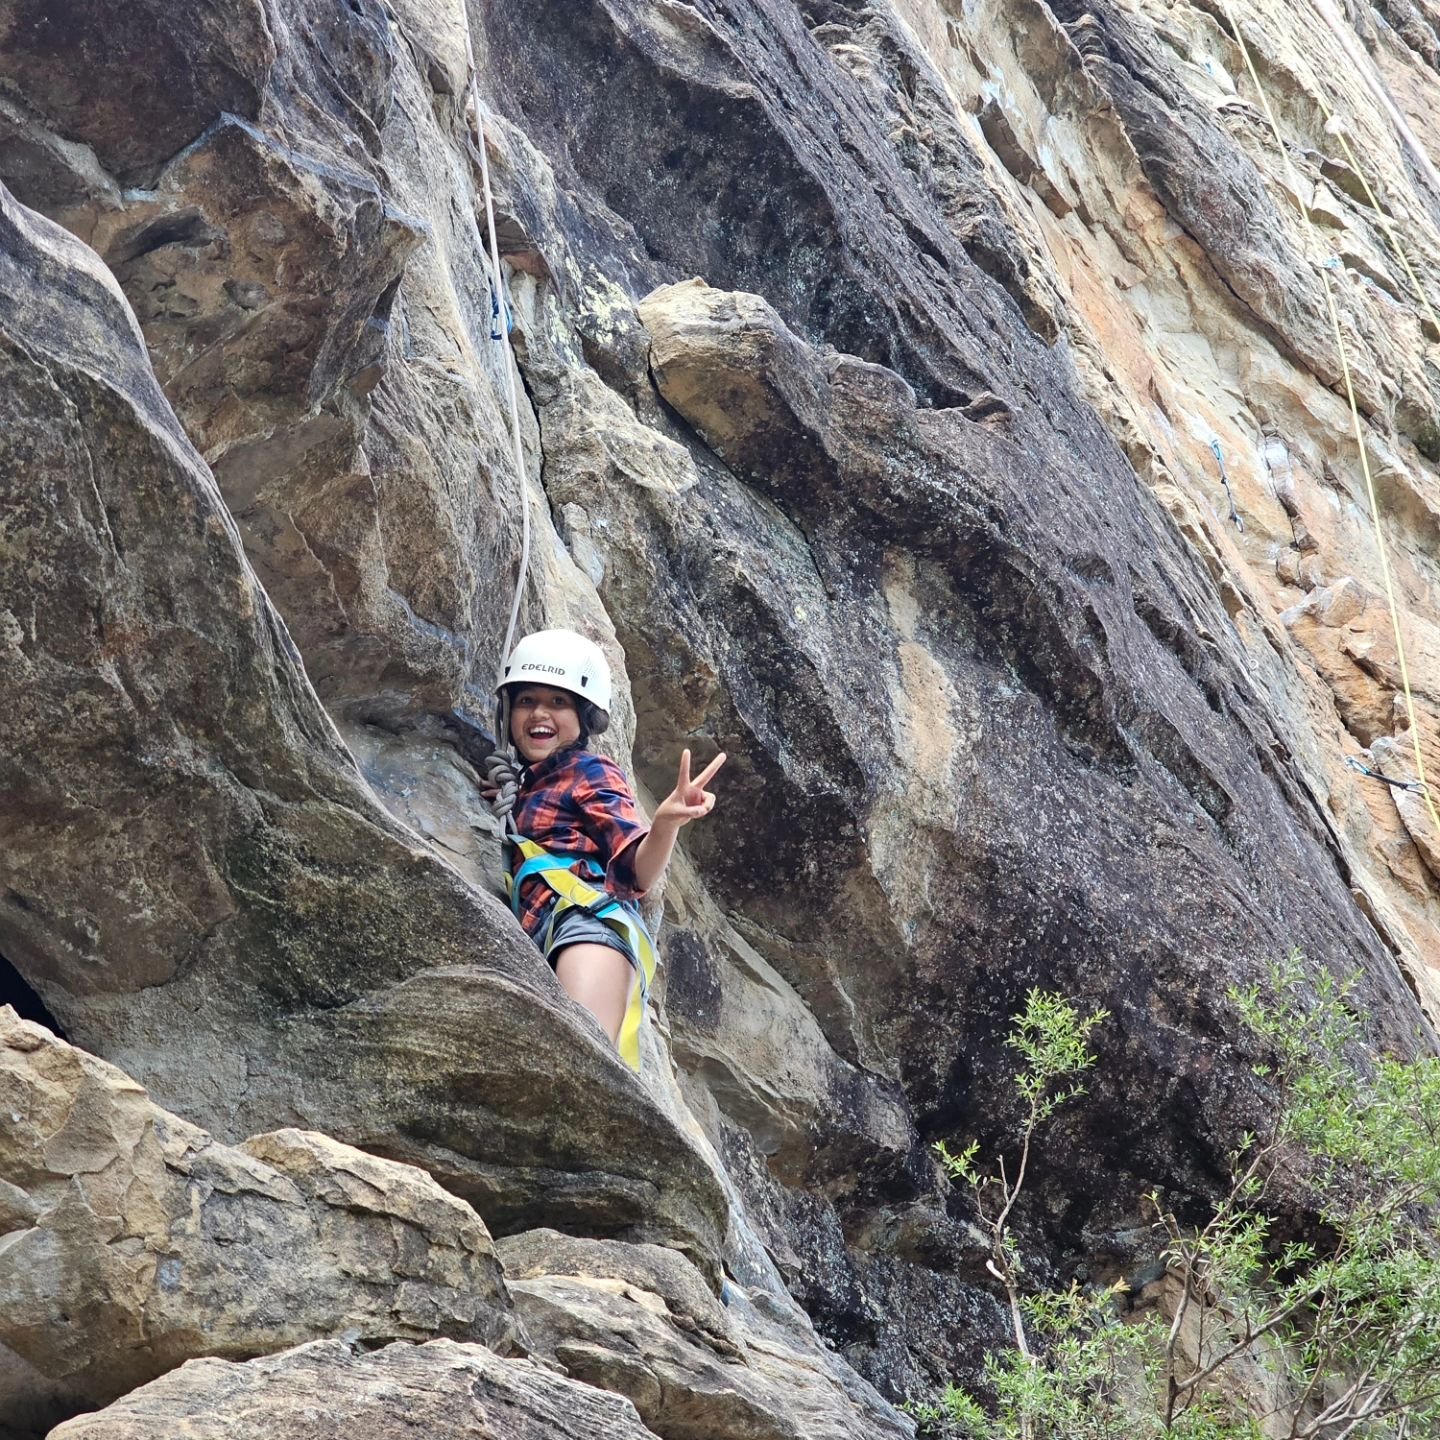 Rock climbing adventures...do you hear the words rock climbing and shudder in your body? 😆 On these adventures, many emotions rise, including fear, avoidance, excitement, and many others. These days, we mix in a lot of play swinging around on the ro